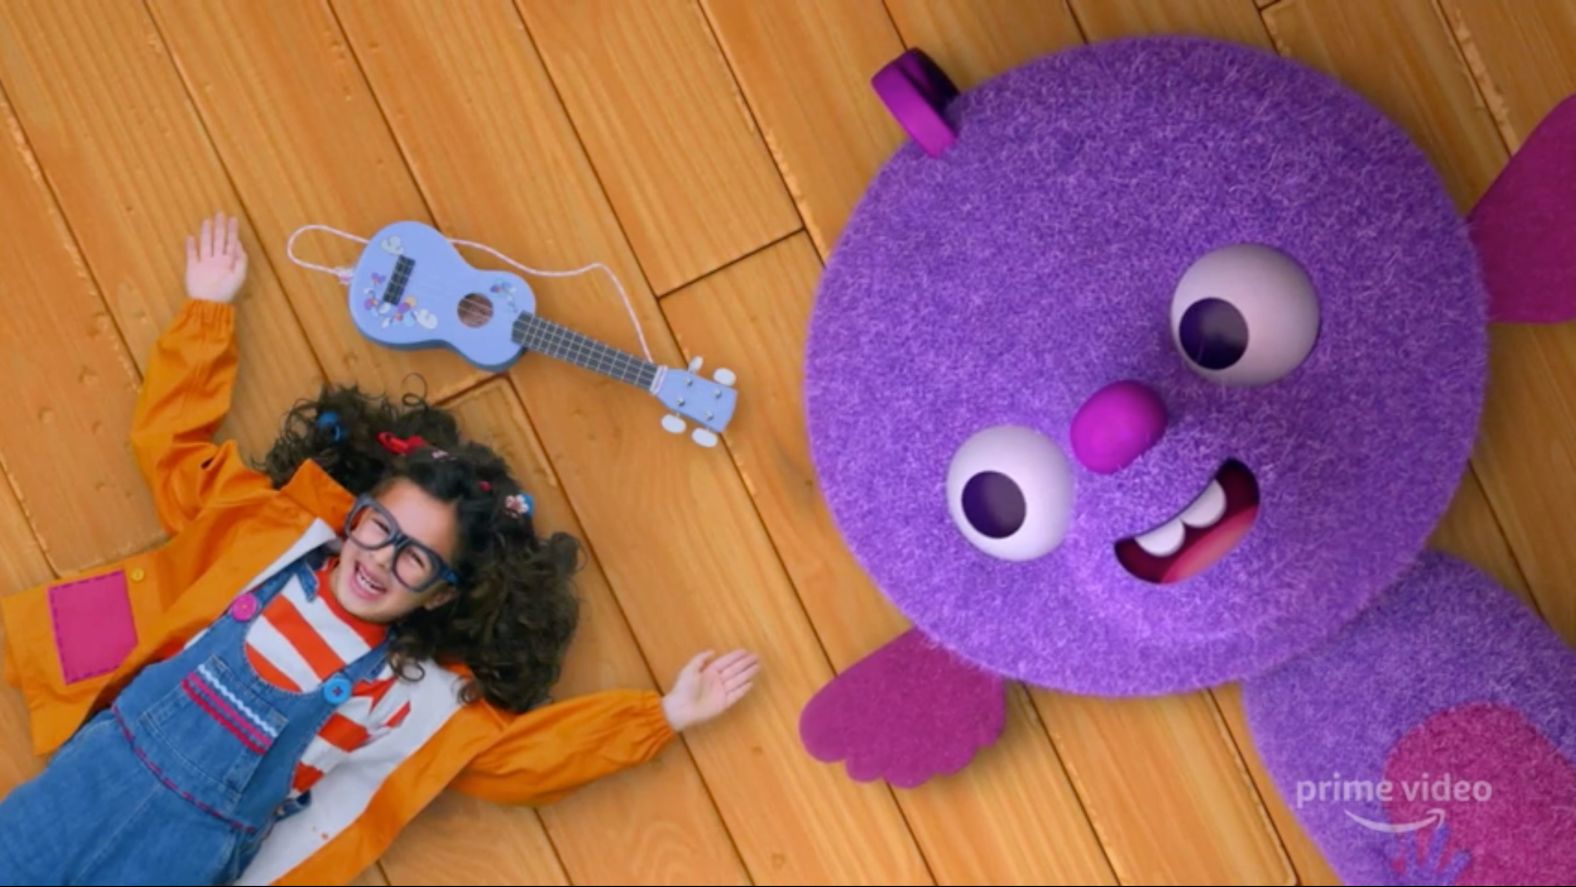 <strong>"Jessy and Nessy"</strong>:  The series follows Jessy, an innately curious little girl, and her best friend Nessy, a five-and-a-half-thousand-year-old purple sea monster. Together this unlikely duo explore life's curiosities and reveal how all of these seemingly everyday curiosities have fantastical answers. <strong>(Amazon Prime) </strong>